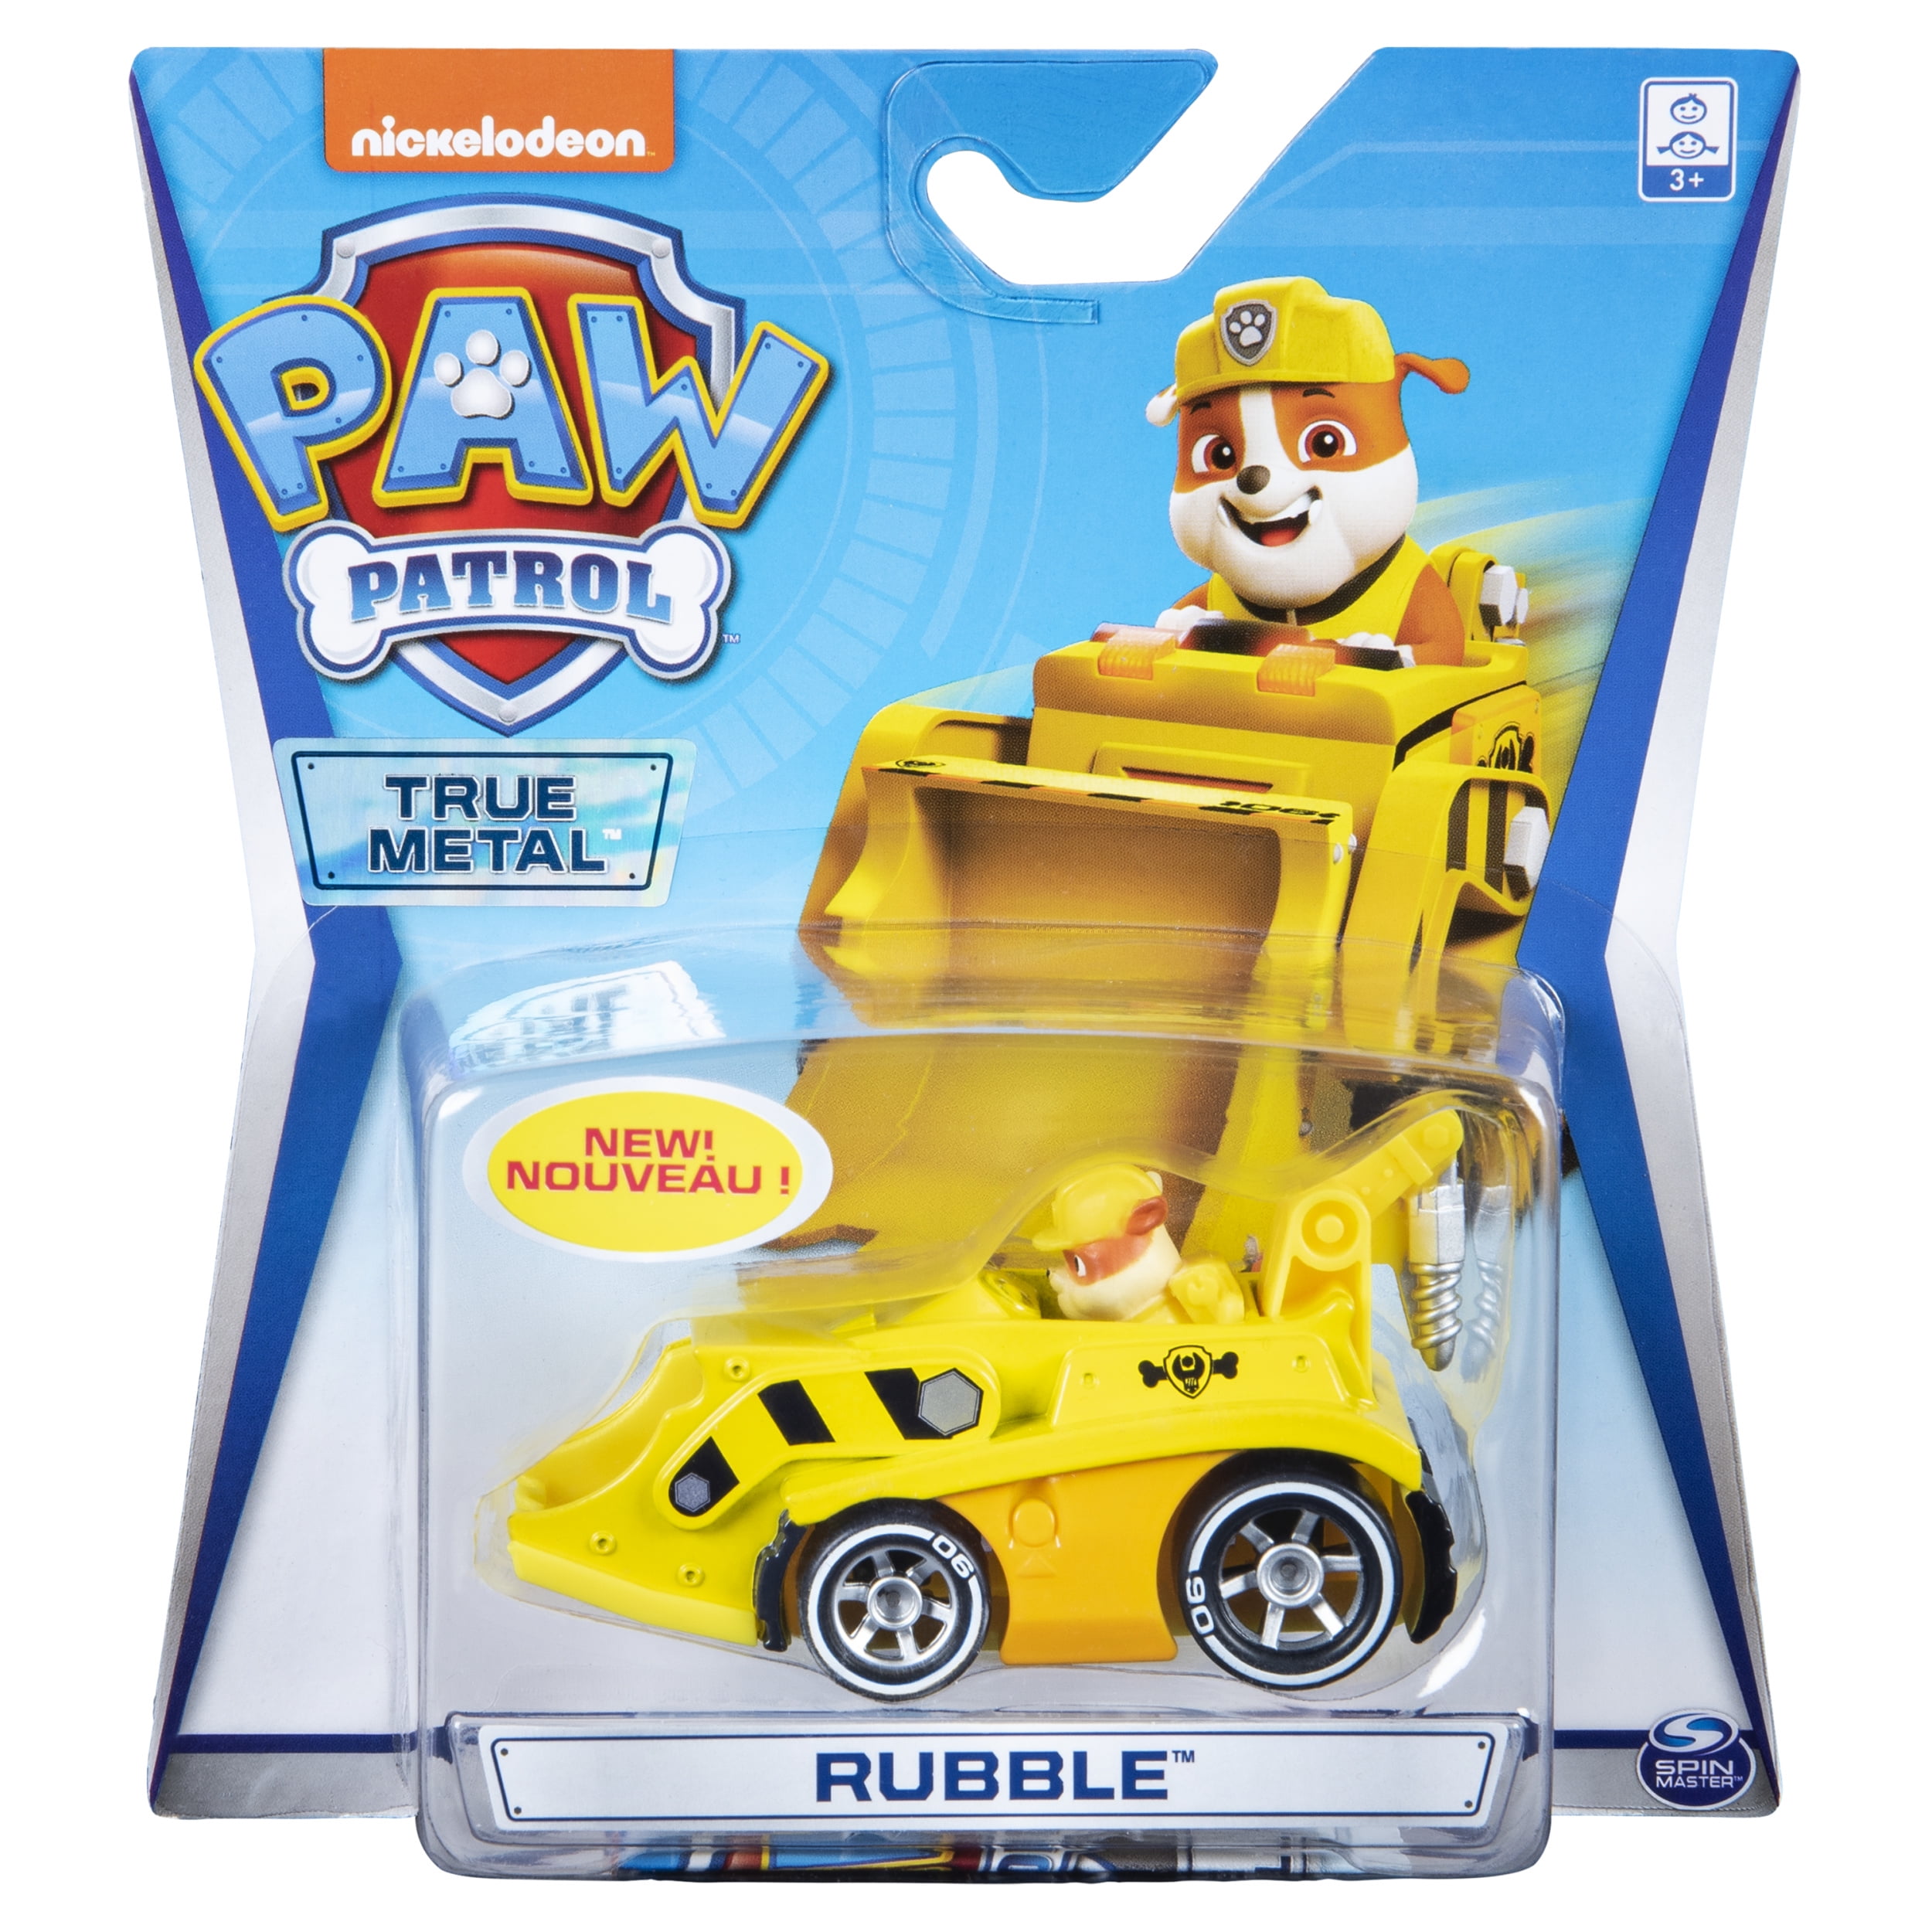 PAW Patrol, True Metal Rubble Collectible Vehicle, Classic Series Scale - Walmart.com